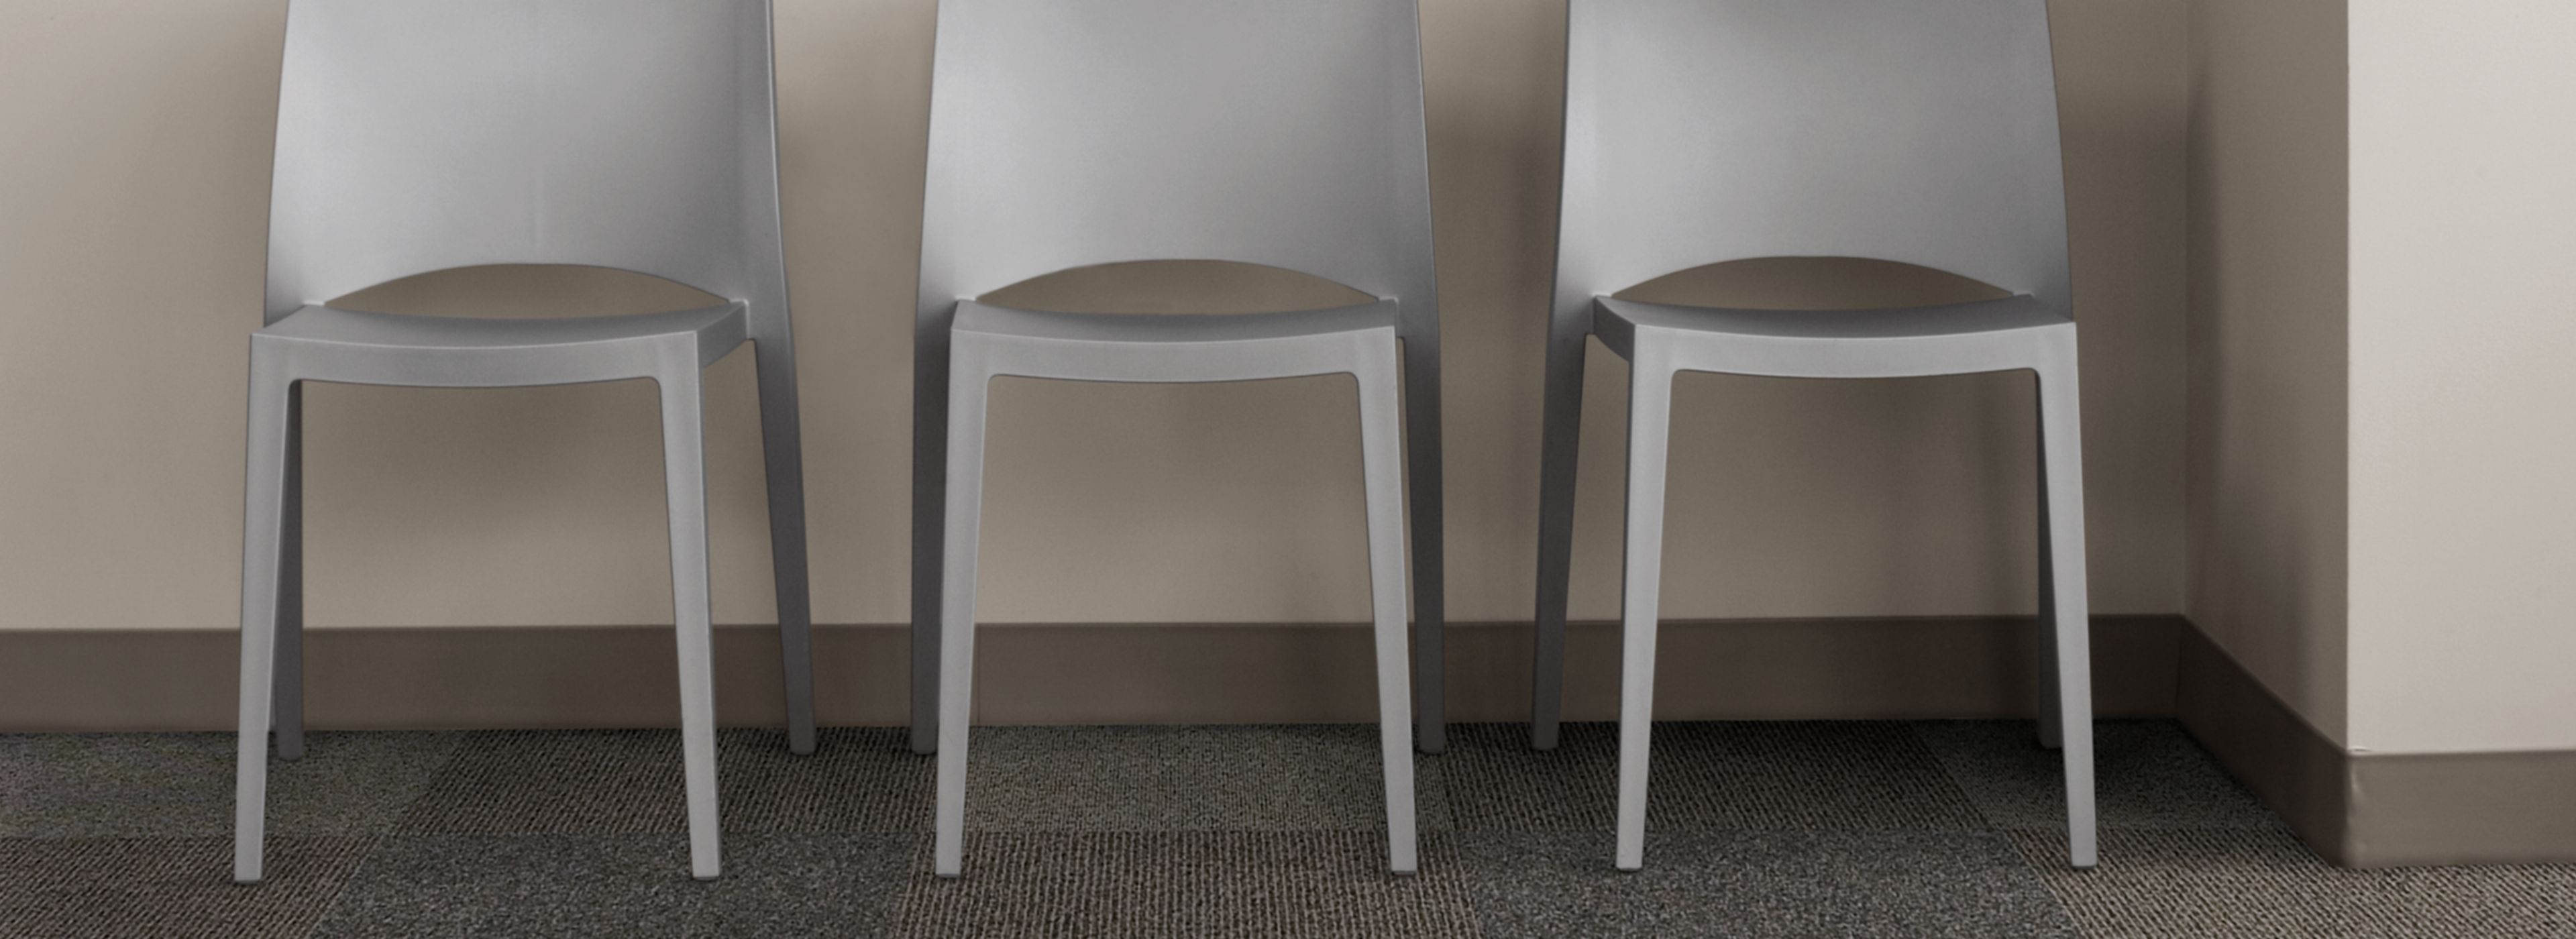 Interface Broomed, Grooved and Brushed carpet tile in room with three chairs numéro d’image 1